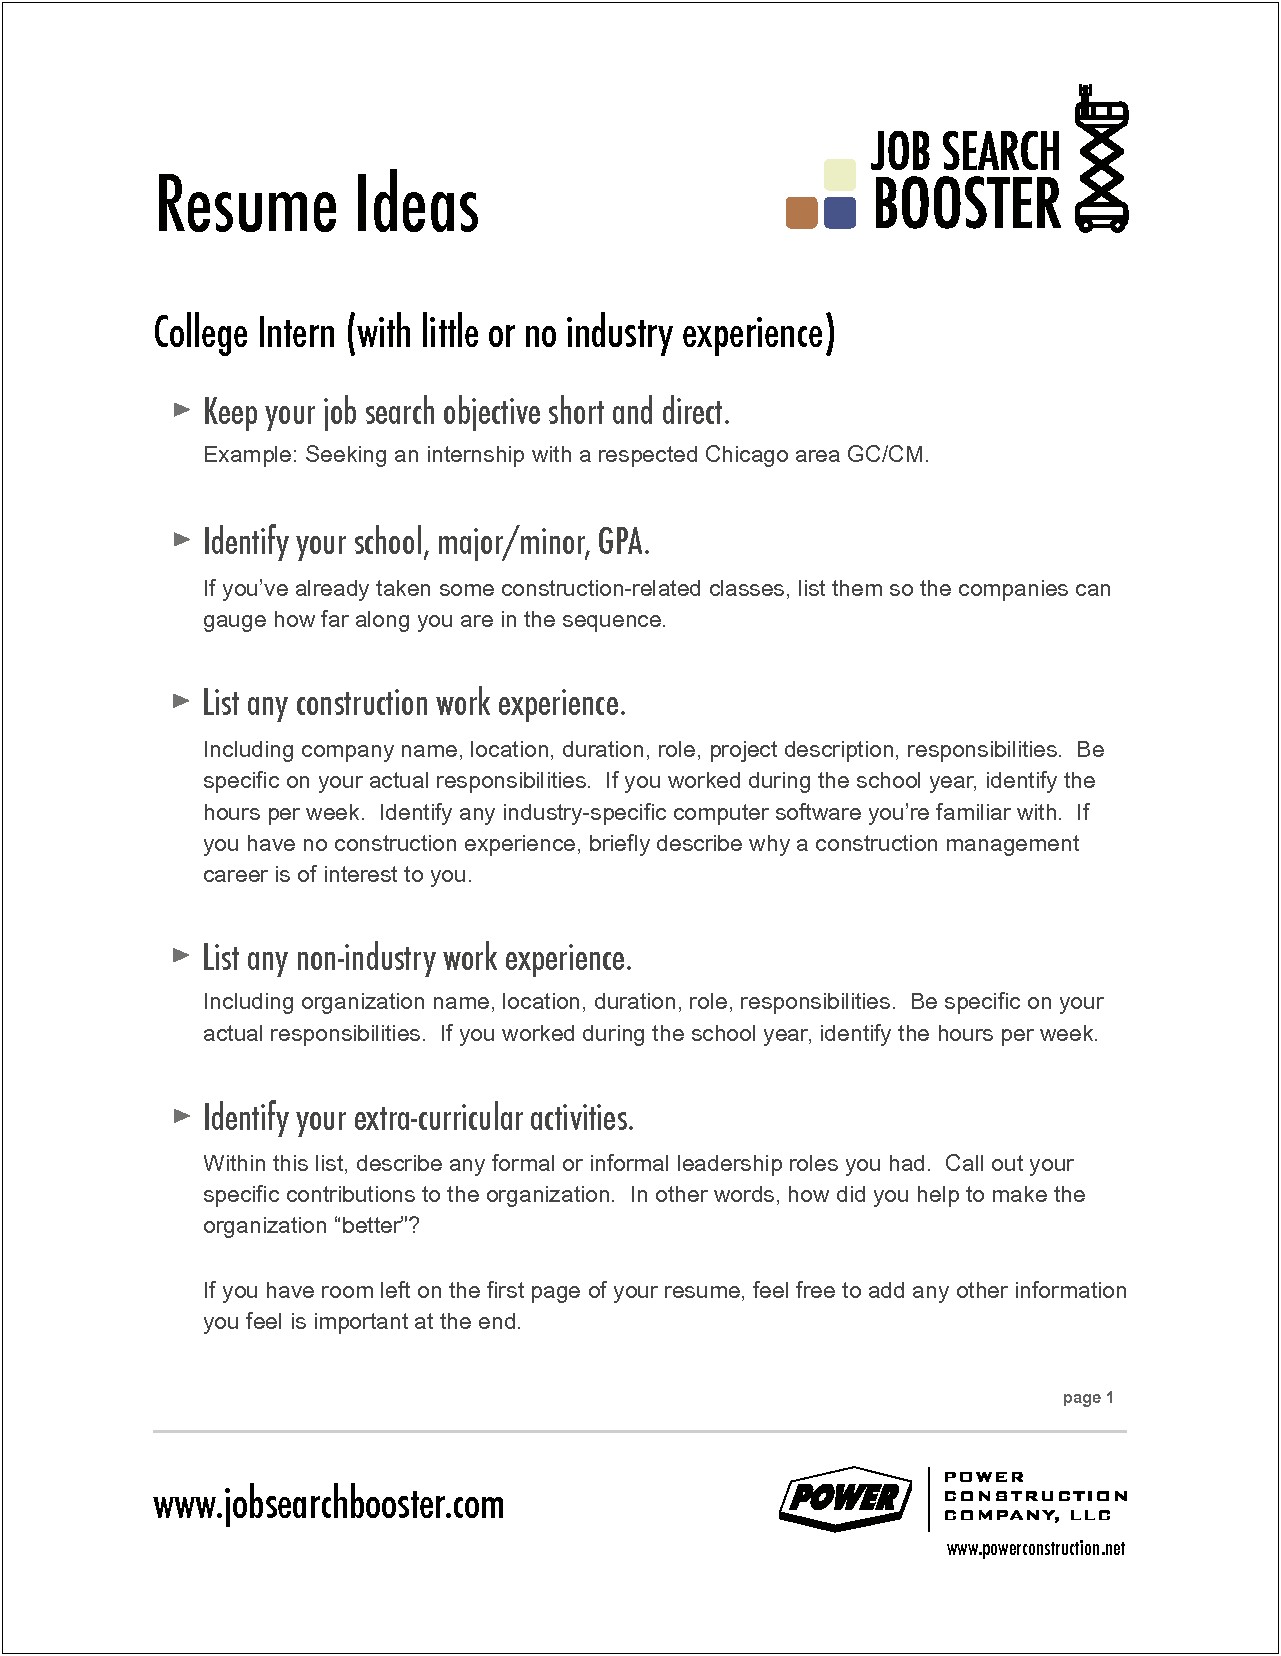 Resume Objectives For Manual Labor